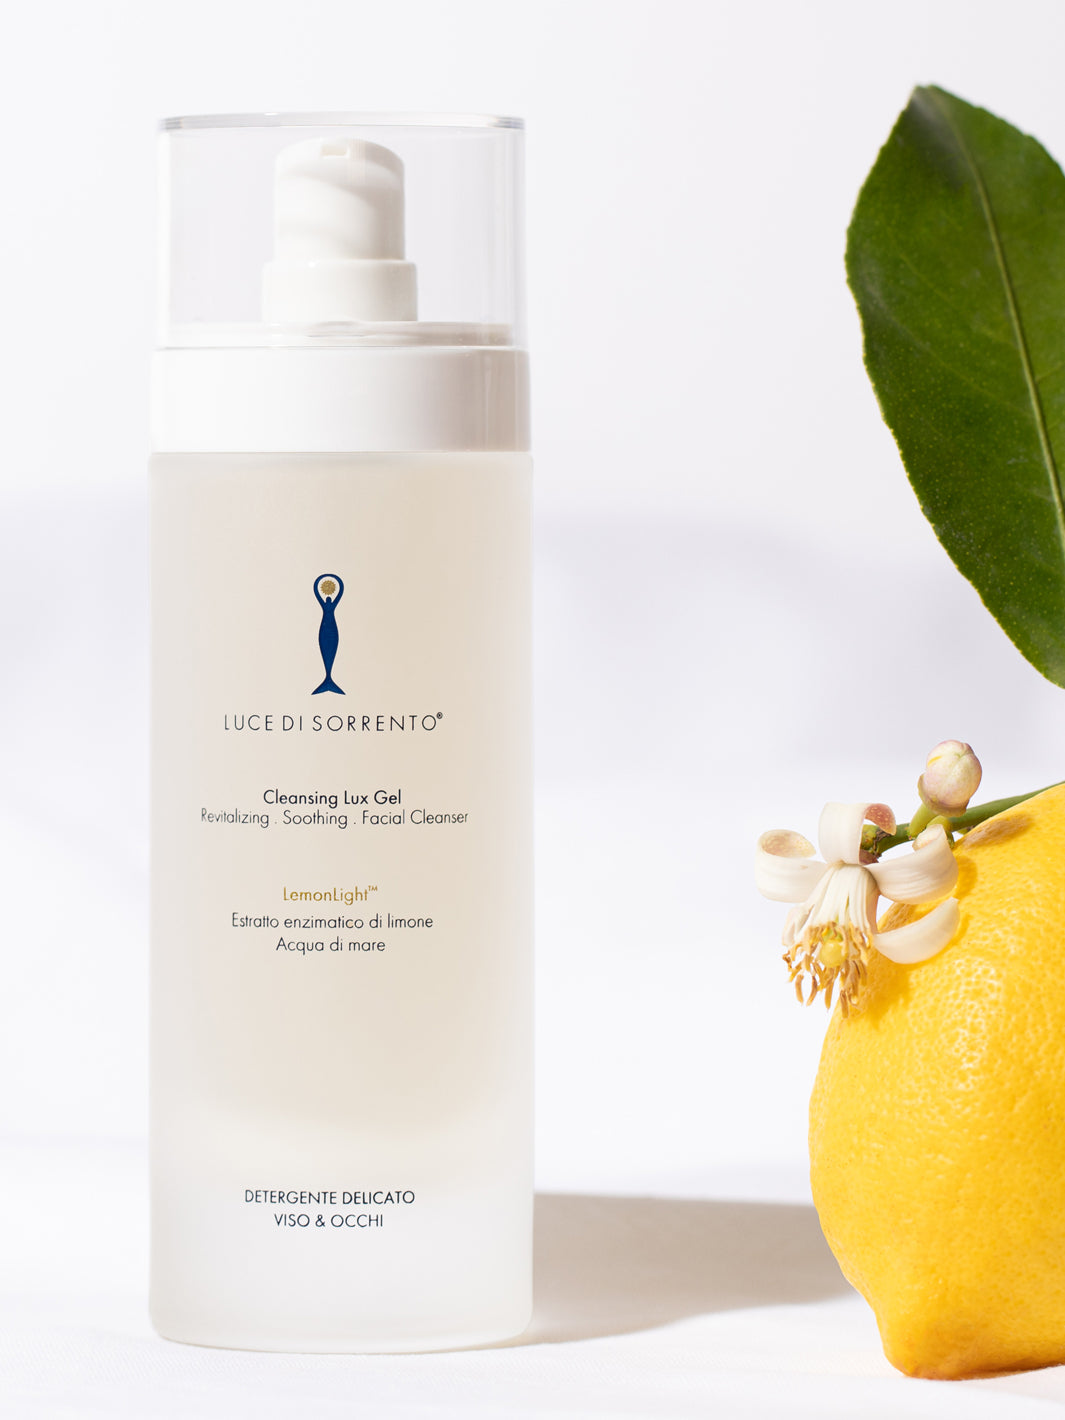 Cleansing Lux Gel | Gentle Cleanser for Face & Eyes